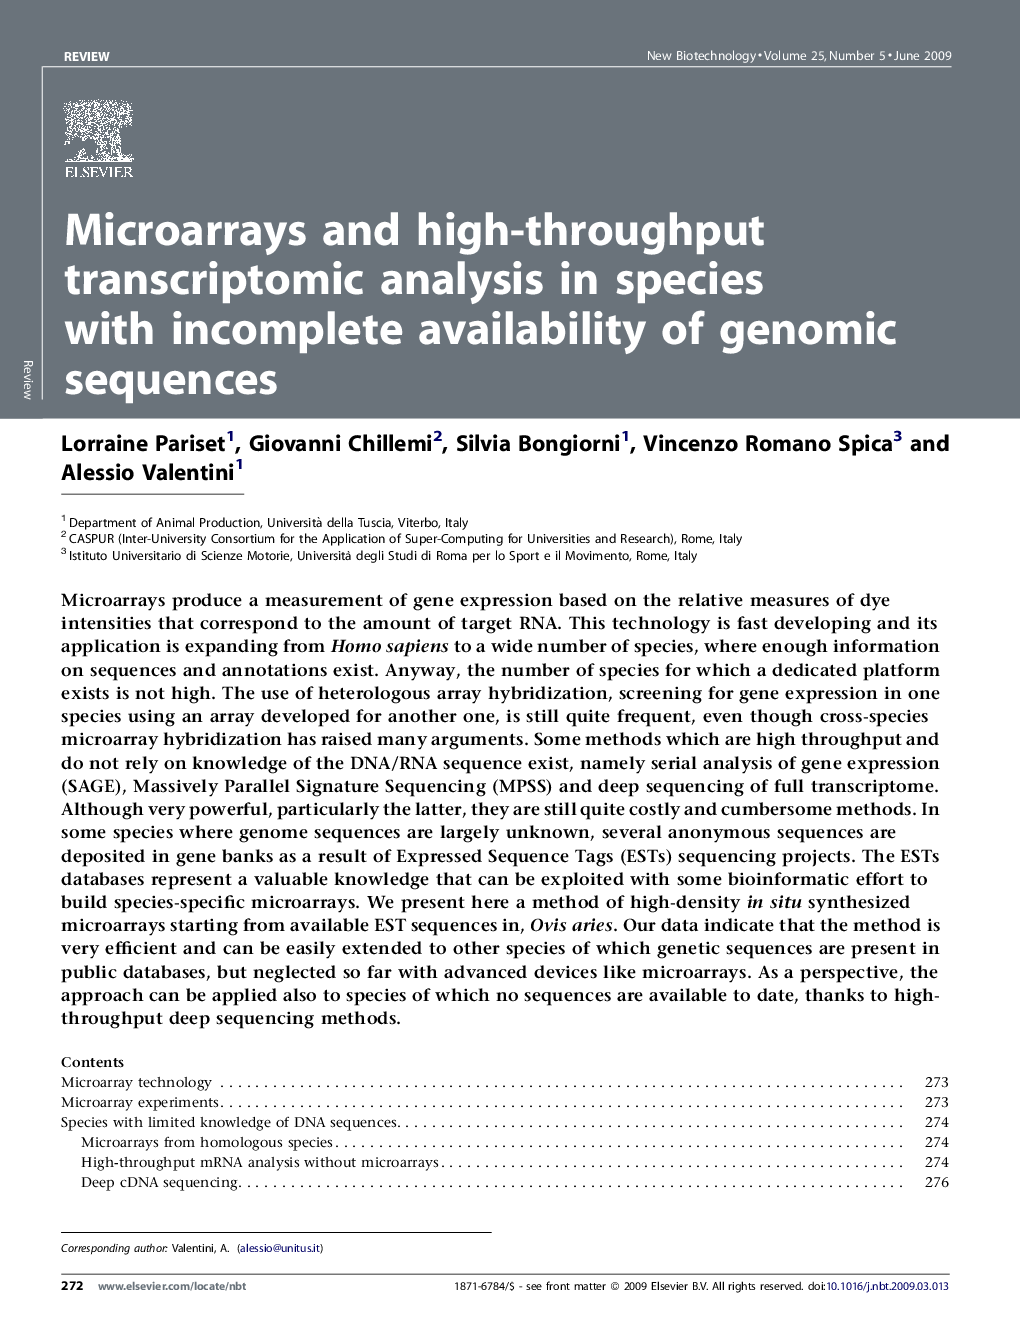 Microarrays and high-throughput transcriptomic analysis in species with incomplete availability of genomic sequences